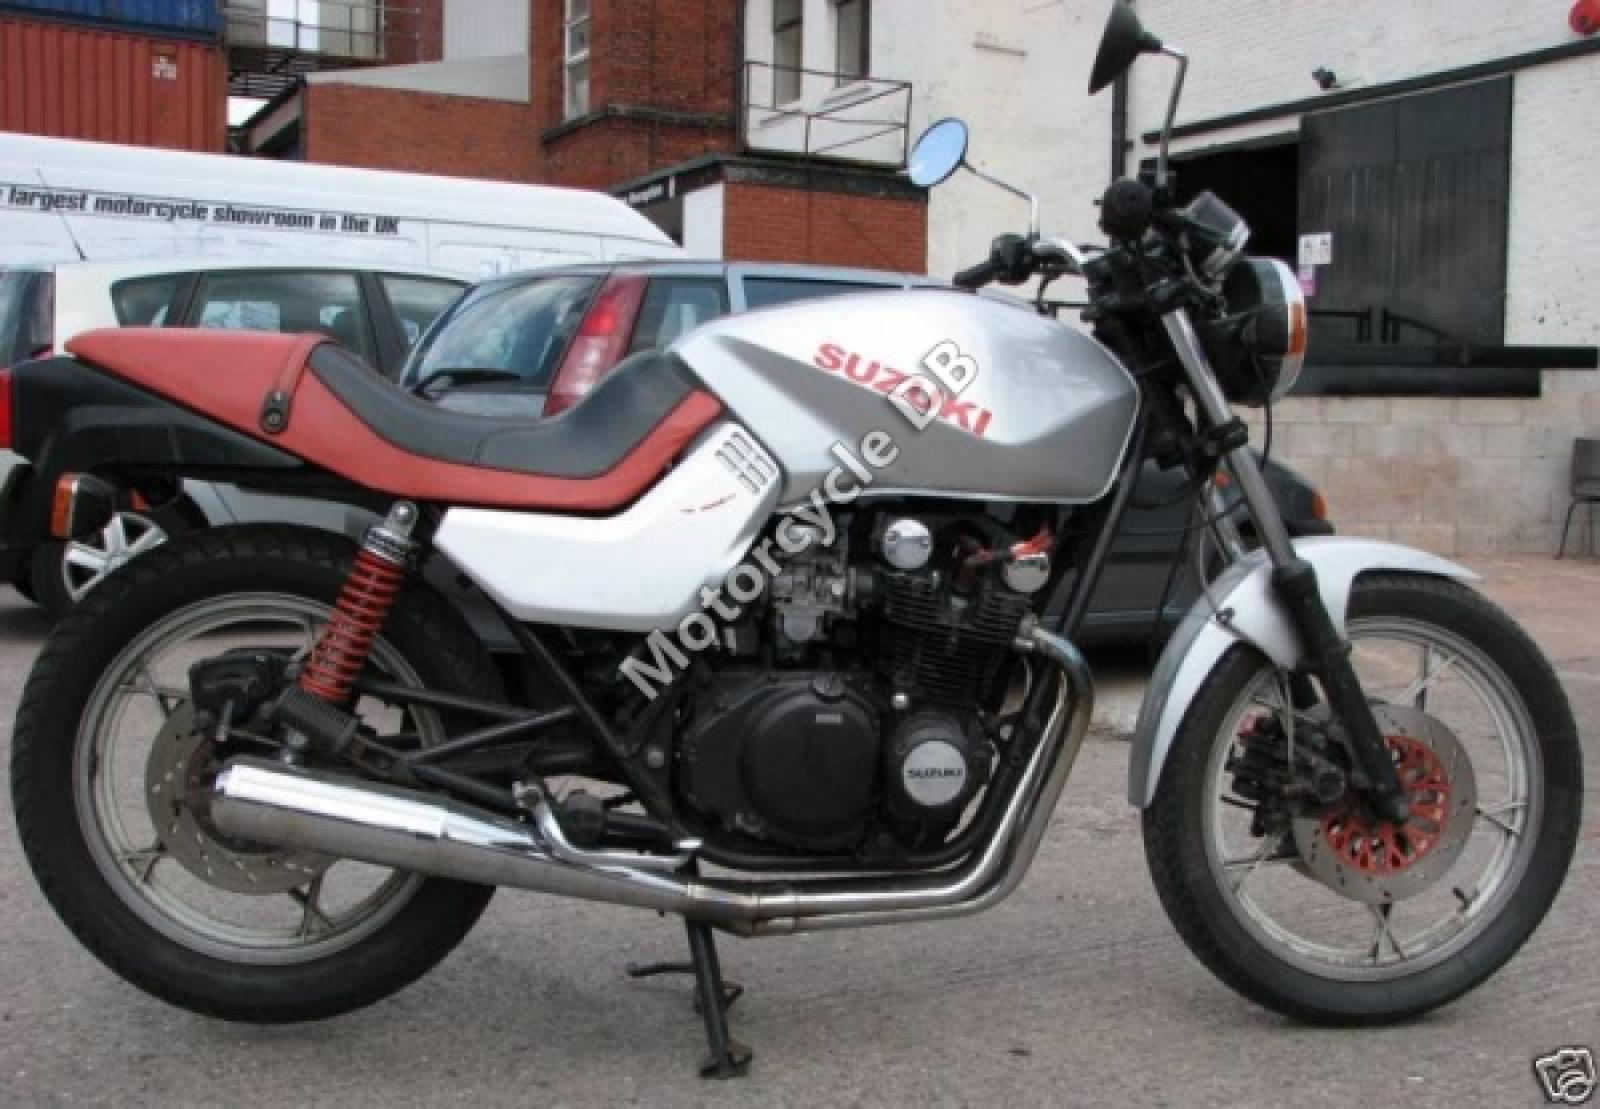 Review of Suzuki GS 550 M Katana 1982: pictures, live 